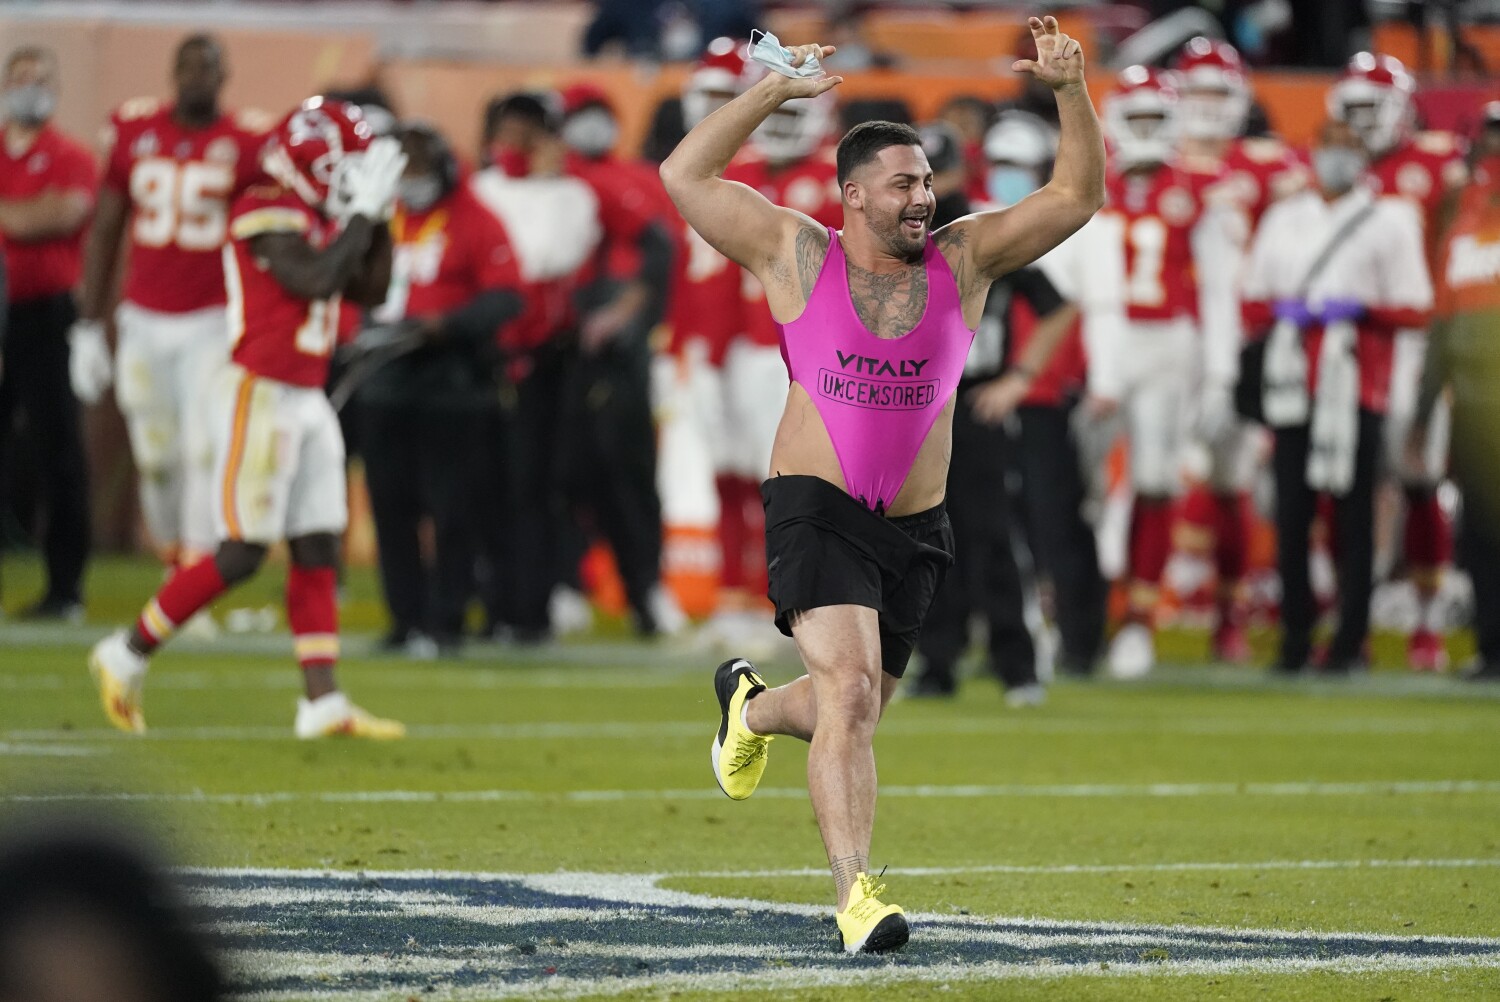 Column: The untold tale of the San Diego surfer who enabled last year's Super Bowl streaker